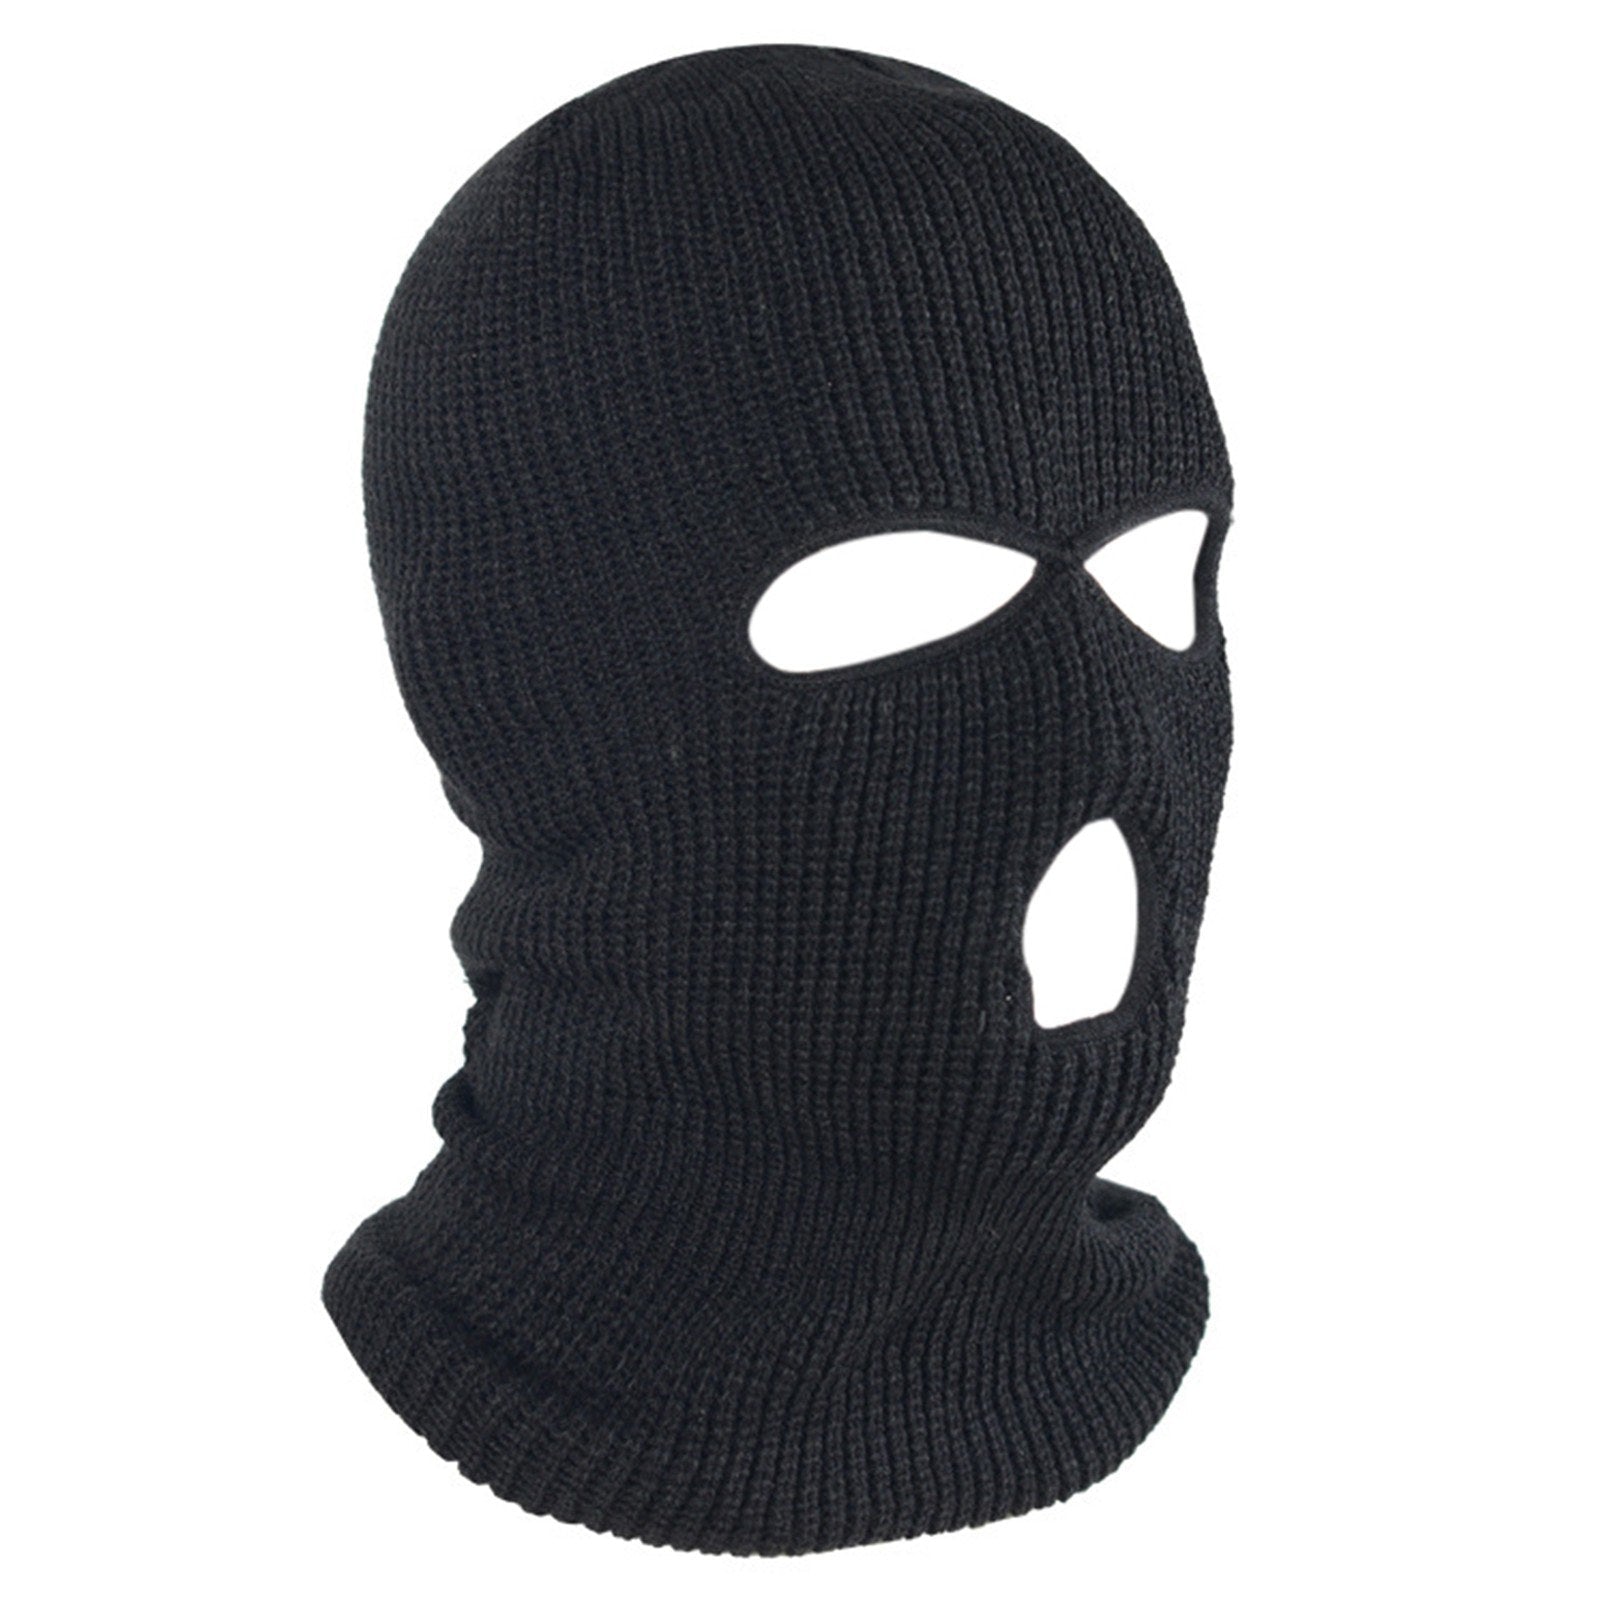 Thermal Face Mask Wind-proof 3 Hole Winter Knitted Cycling Mask Neck Warmer Motorcycle Under Helmet Lining Mask Caps Ultimate Thermal Retention Hat Full Face Cover Ski Mask